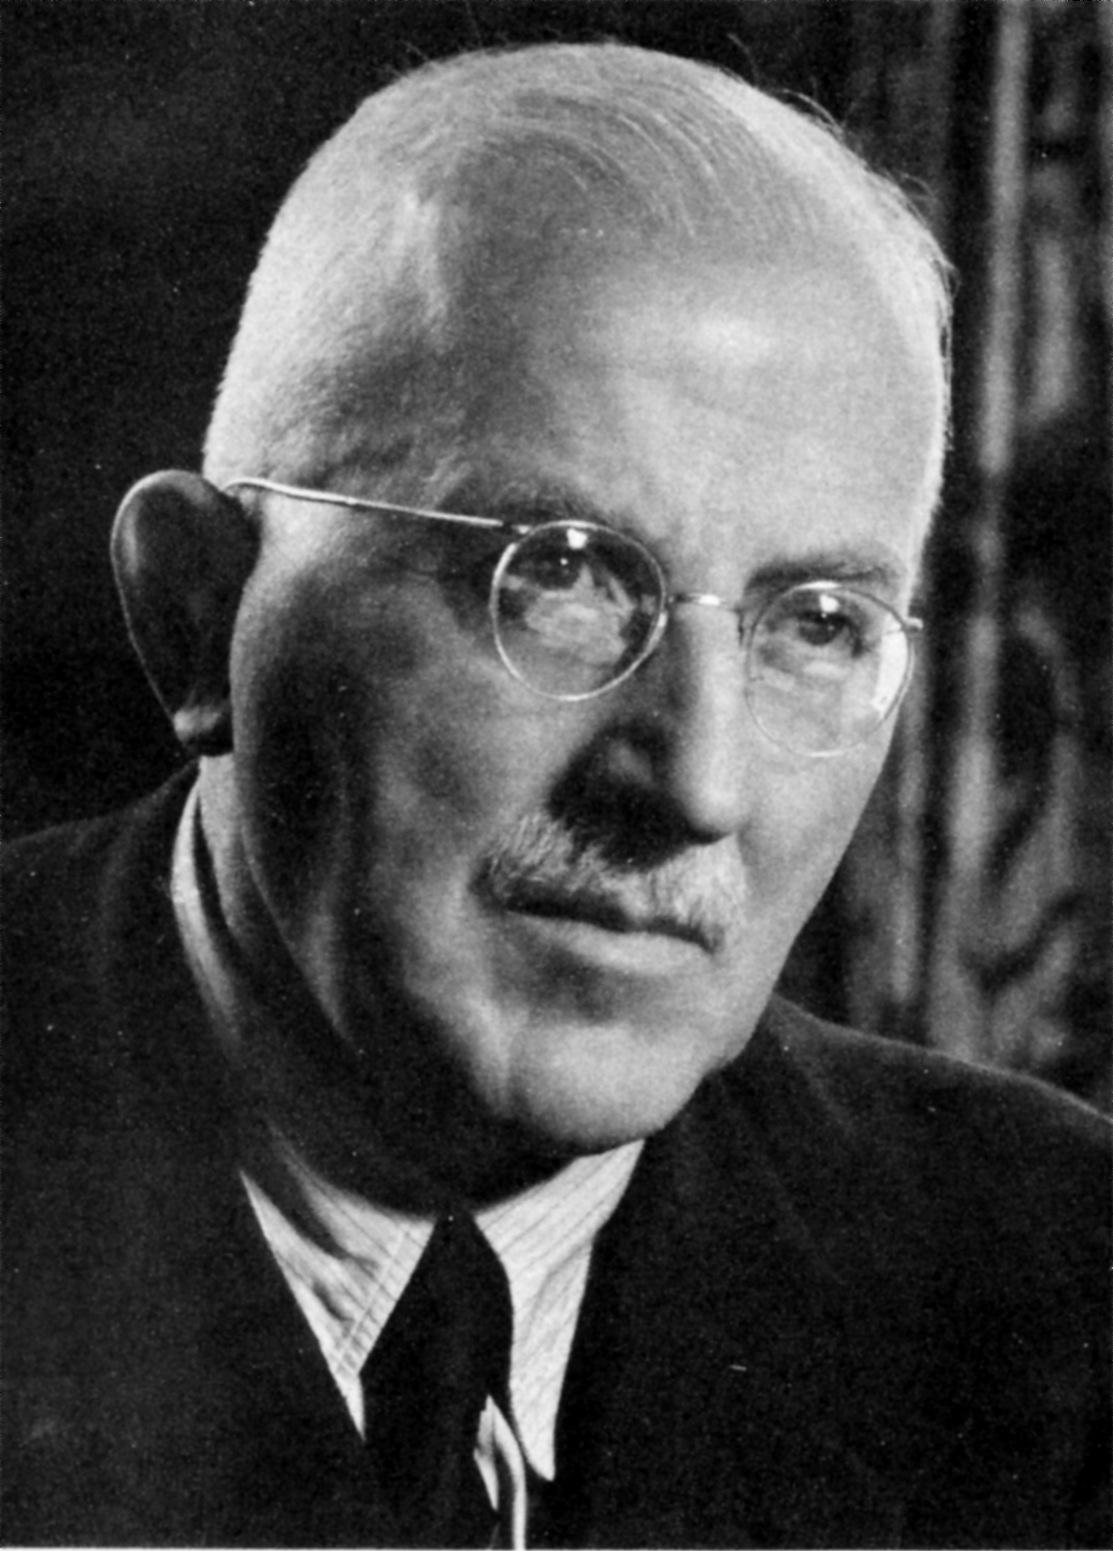 Hermann Staudinger (23 March 1881 – 8 September 1965) was a German organic chemist who demonstrated the existence of macromolecules, which he characterized as polymers. For this work he received the 1953 Nobel Prize in Chemistry.